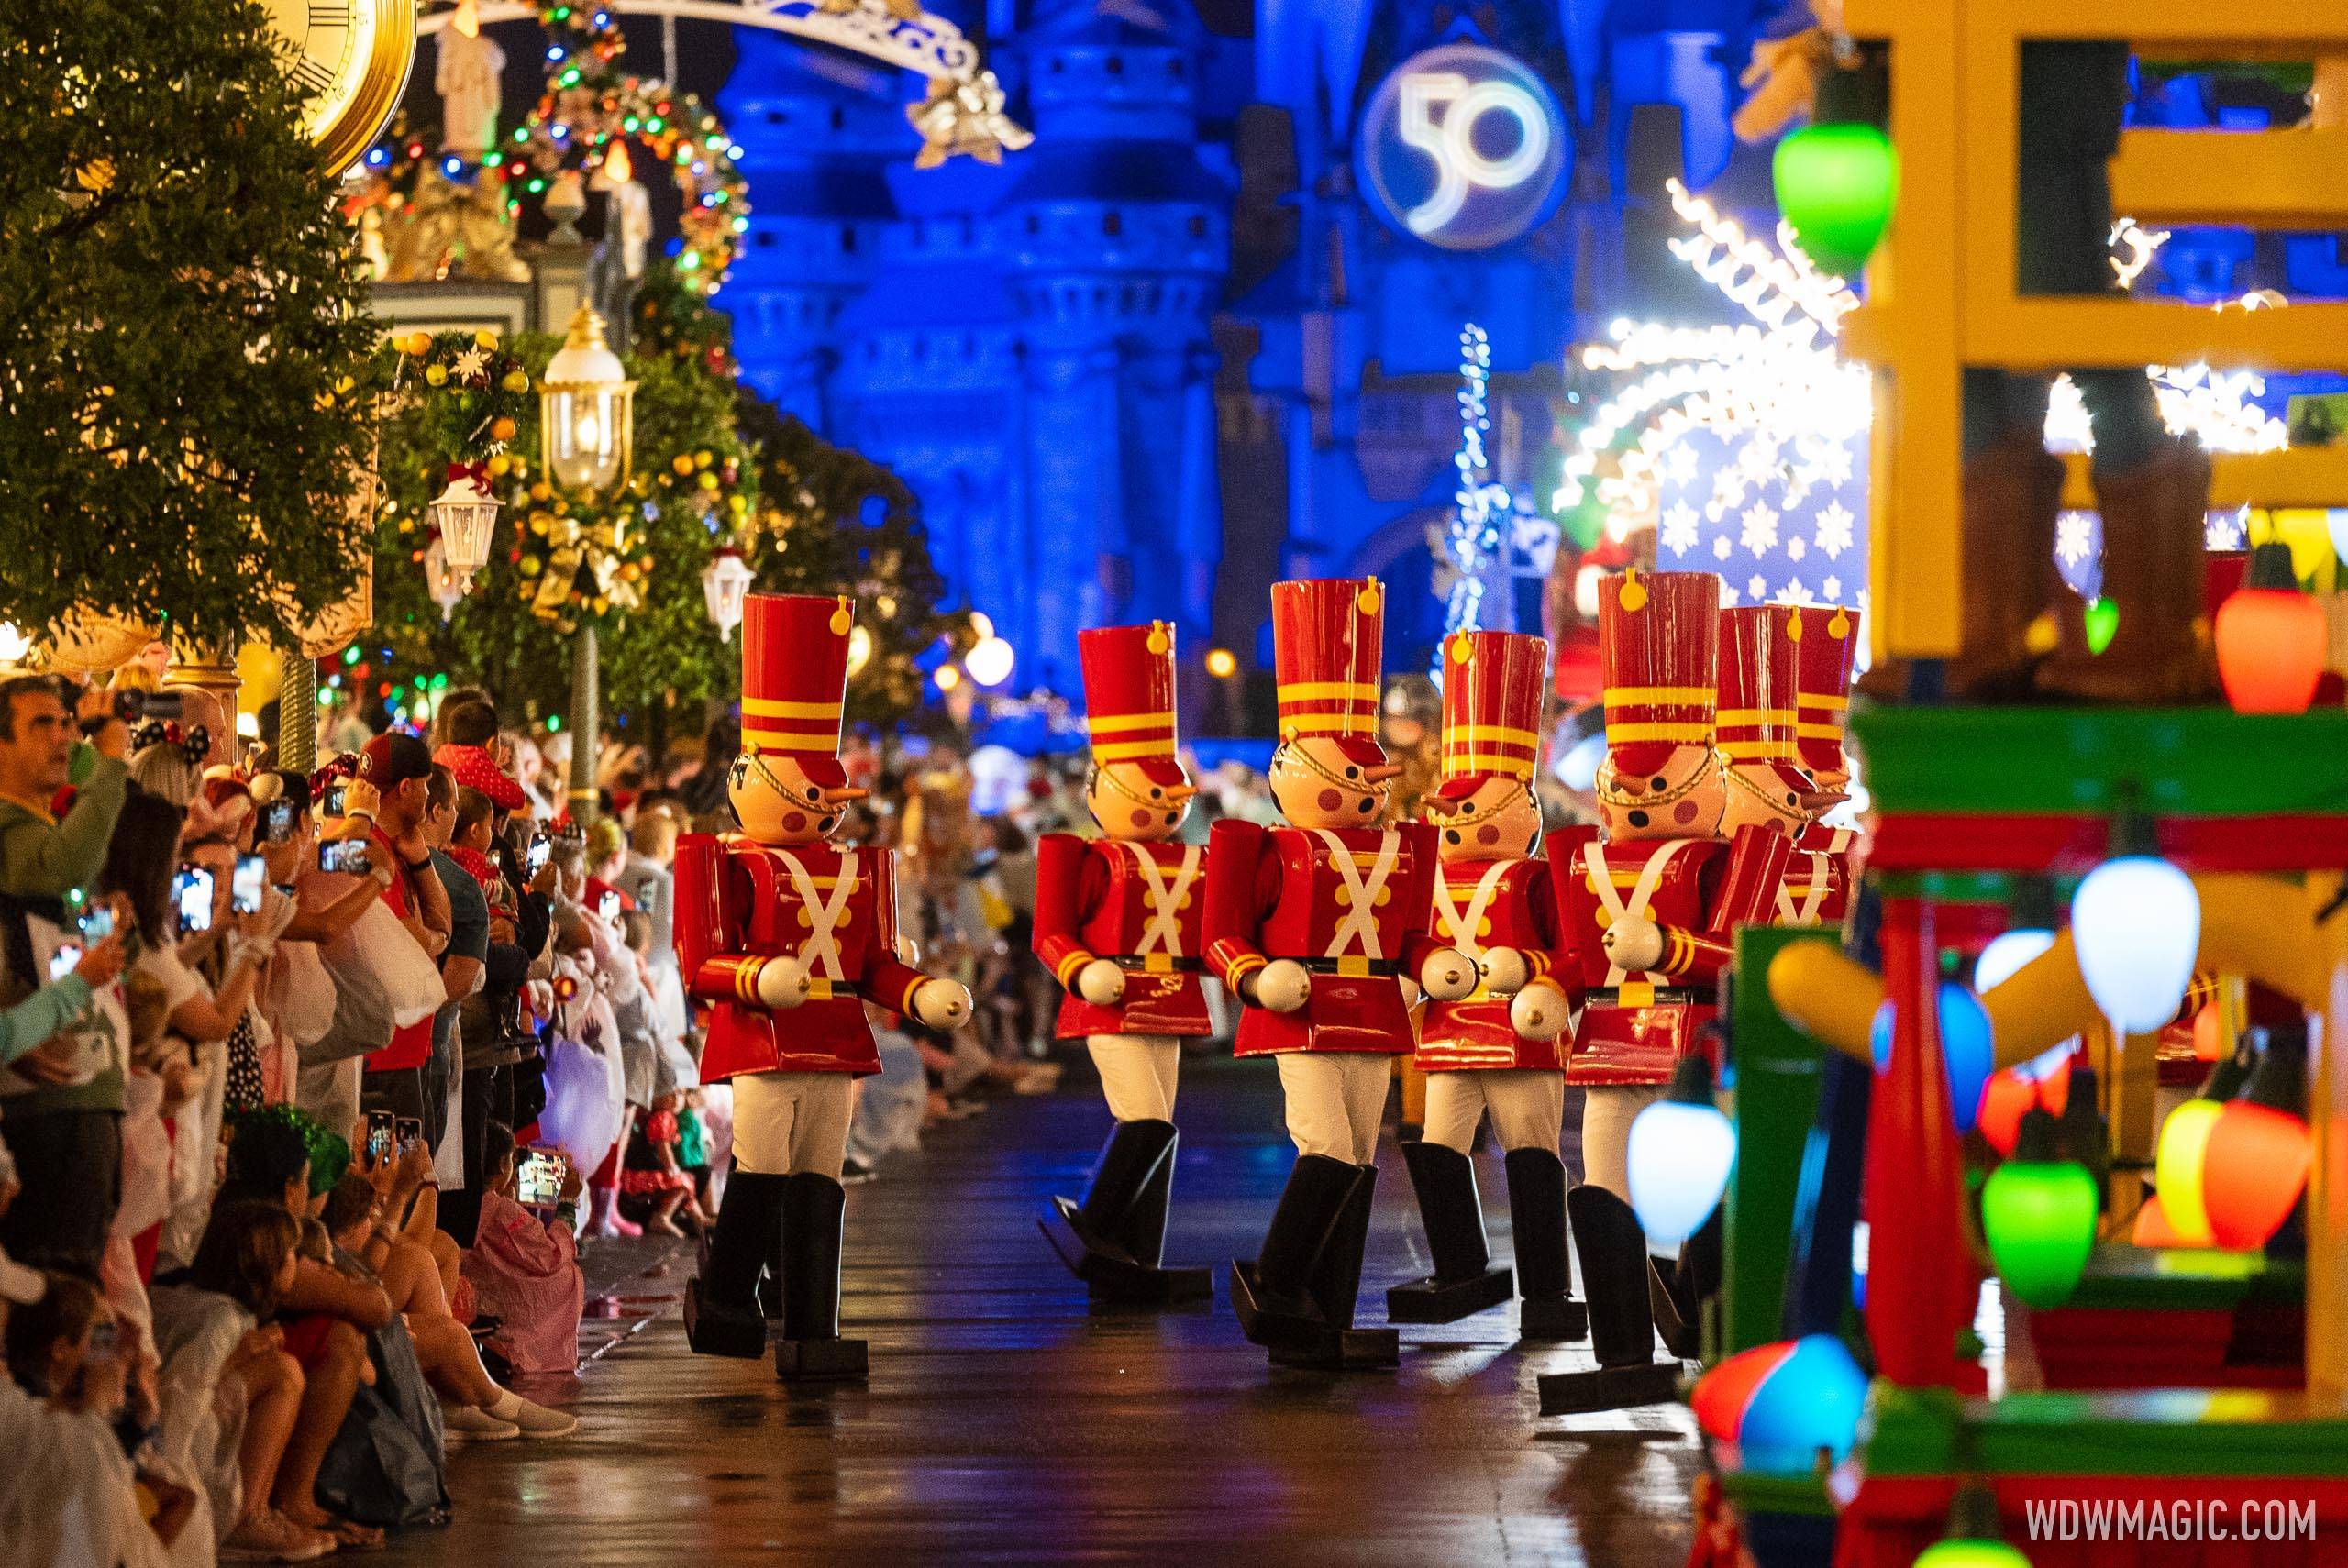 Disney is offering 1-Day Tickets or party exchange for guests at last night's rained out Very Merry Christmas Party